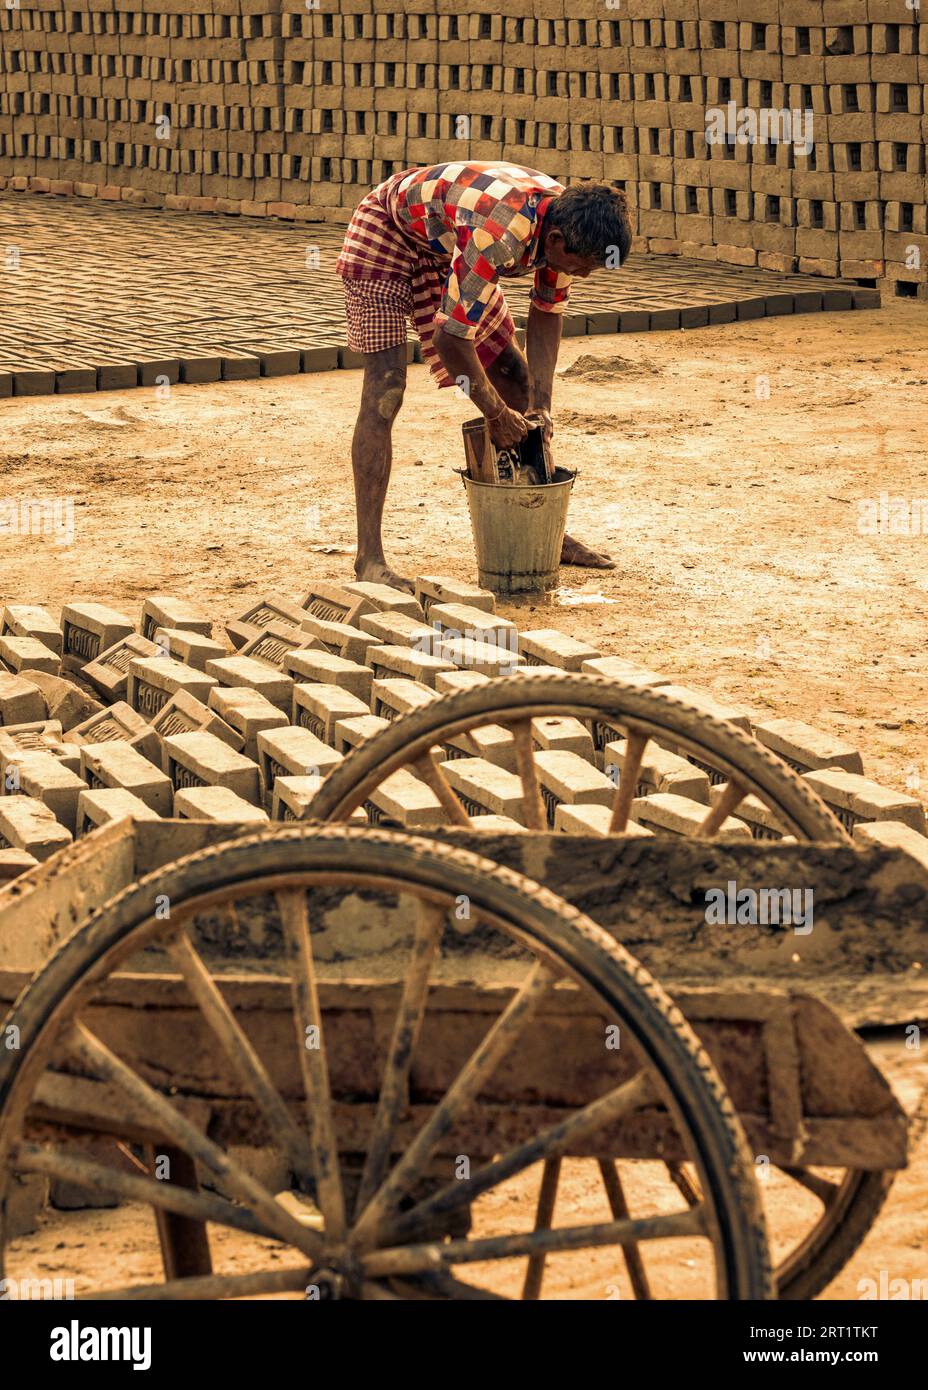 In West Bengal, India, a weary laborer meticulously cleans brick molds, concluding a laborious day at a traditional clay brick manufacturing plant. Stock Photo